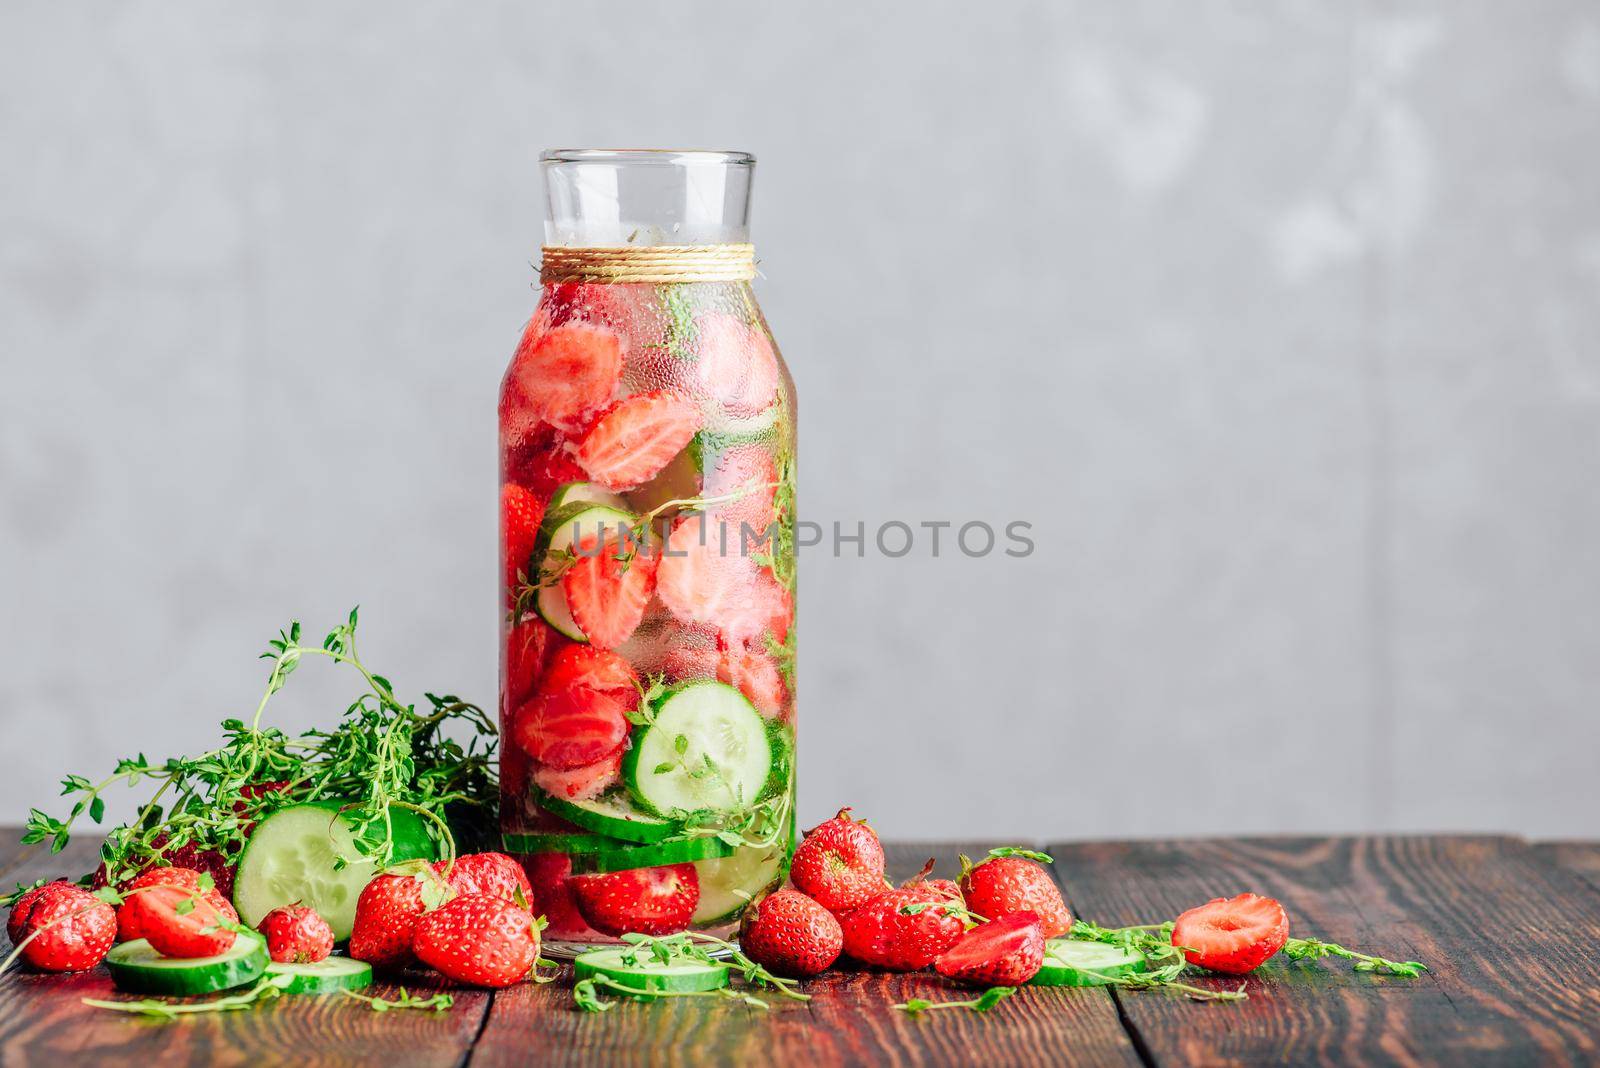 Bottle of Infused Water with Fresh Strawberry, Sliced Cucumber and Springs of Thyme. Ingredients Scattered on Wooden Table. Copy Space.